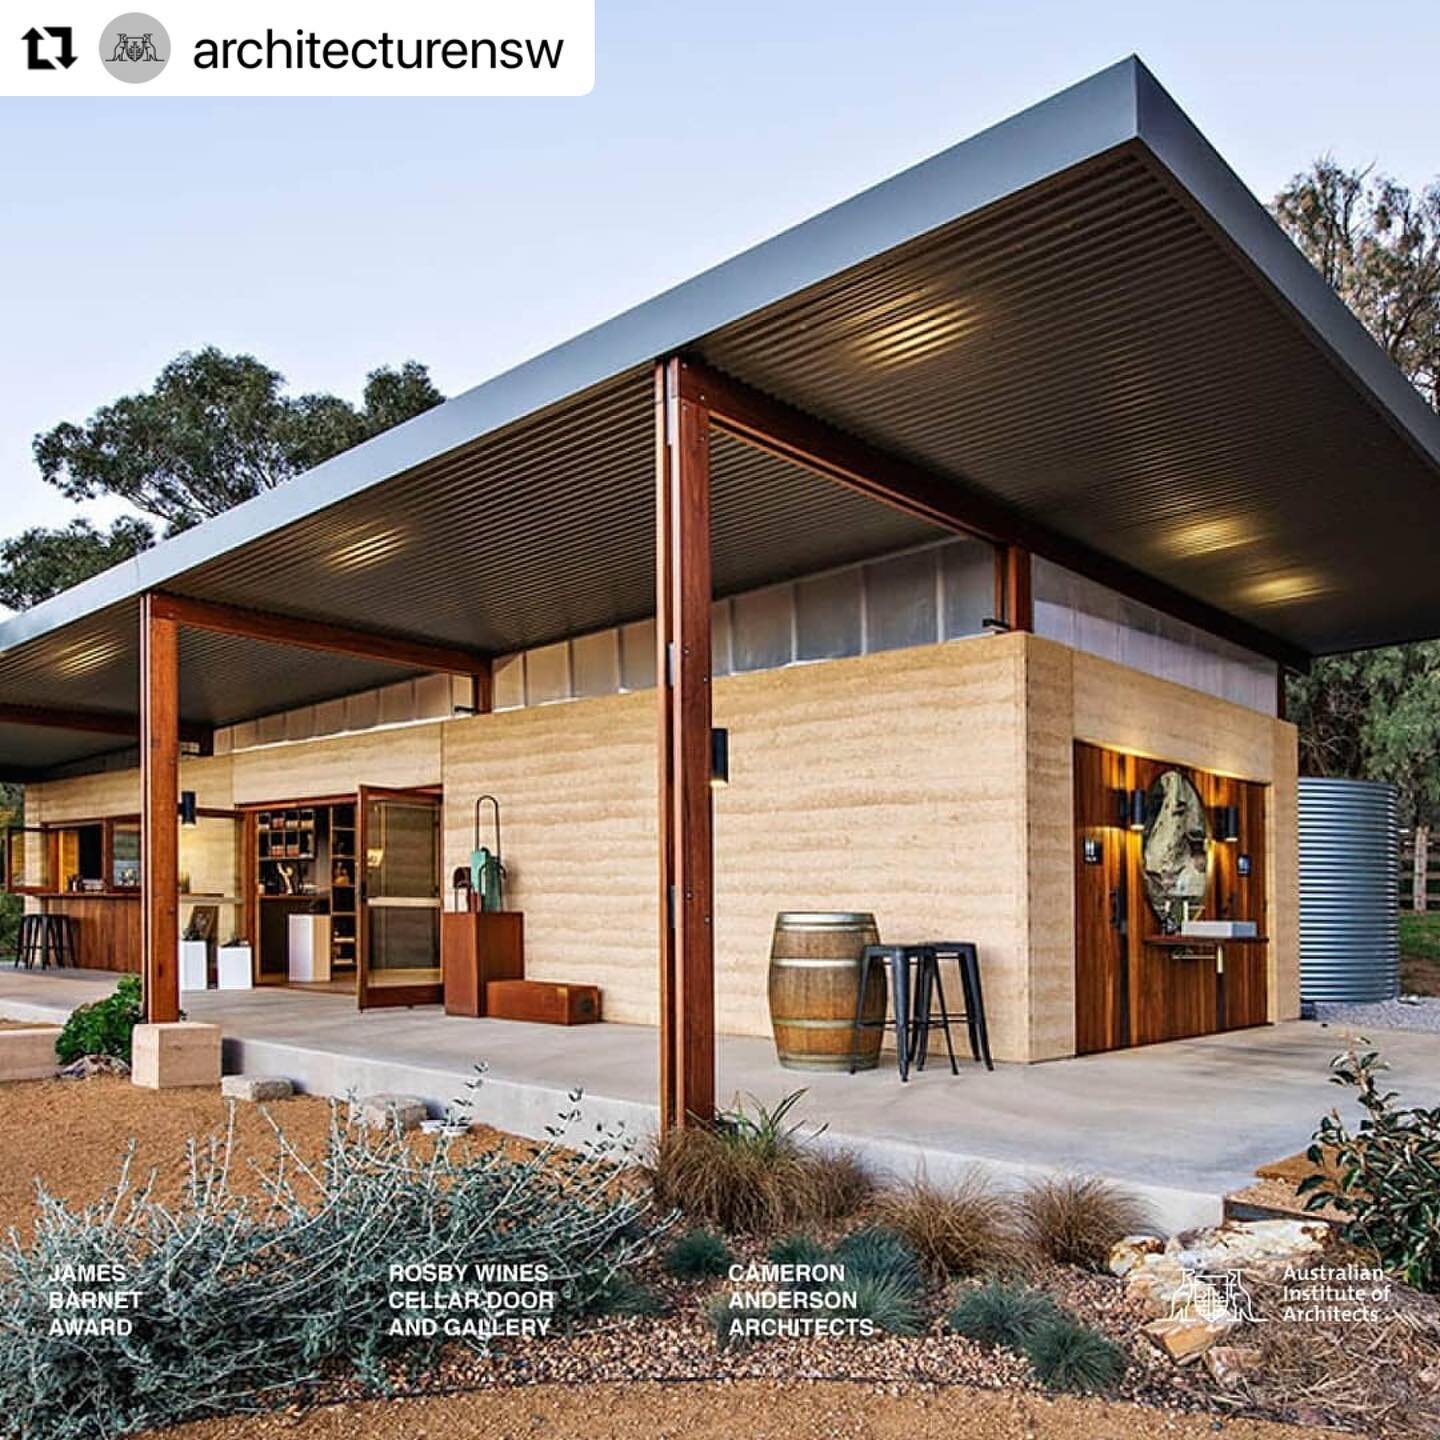 #Repost @architecturensw with @make_repost
・・・
Winner at 2021 NSW Country Division Architecture Awards. 
​
​Congratulations to Cameron Anderson Architects for winning the James Barnet Award for their Rosby Wines Cellar Door and Gallery Project .&nbsp